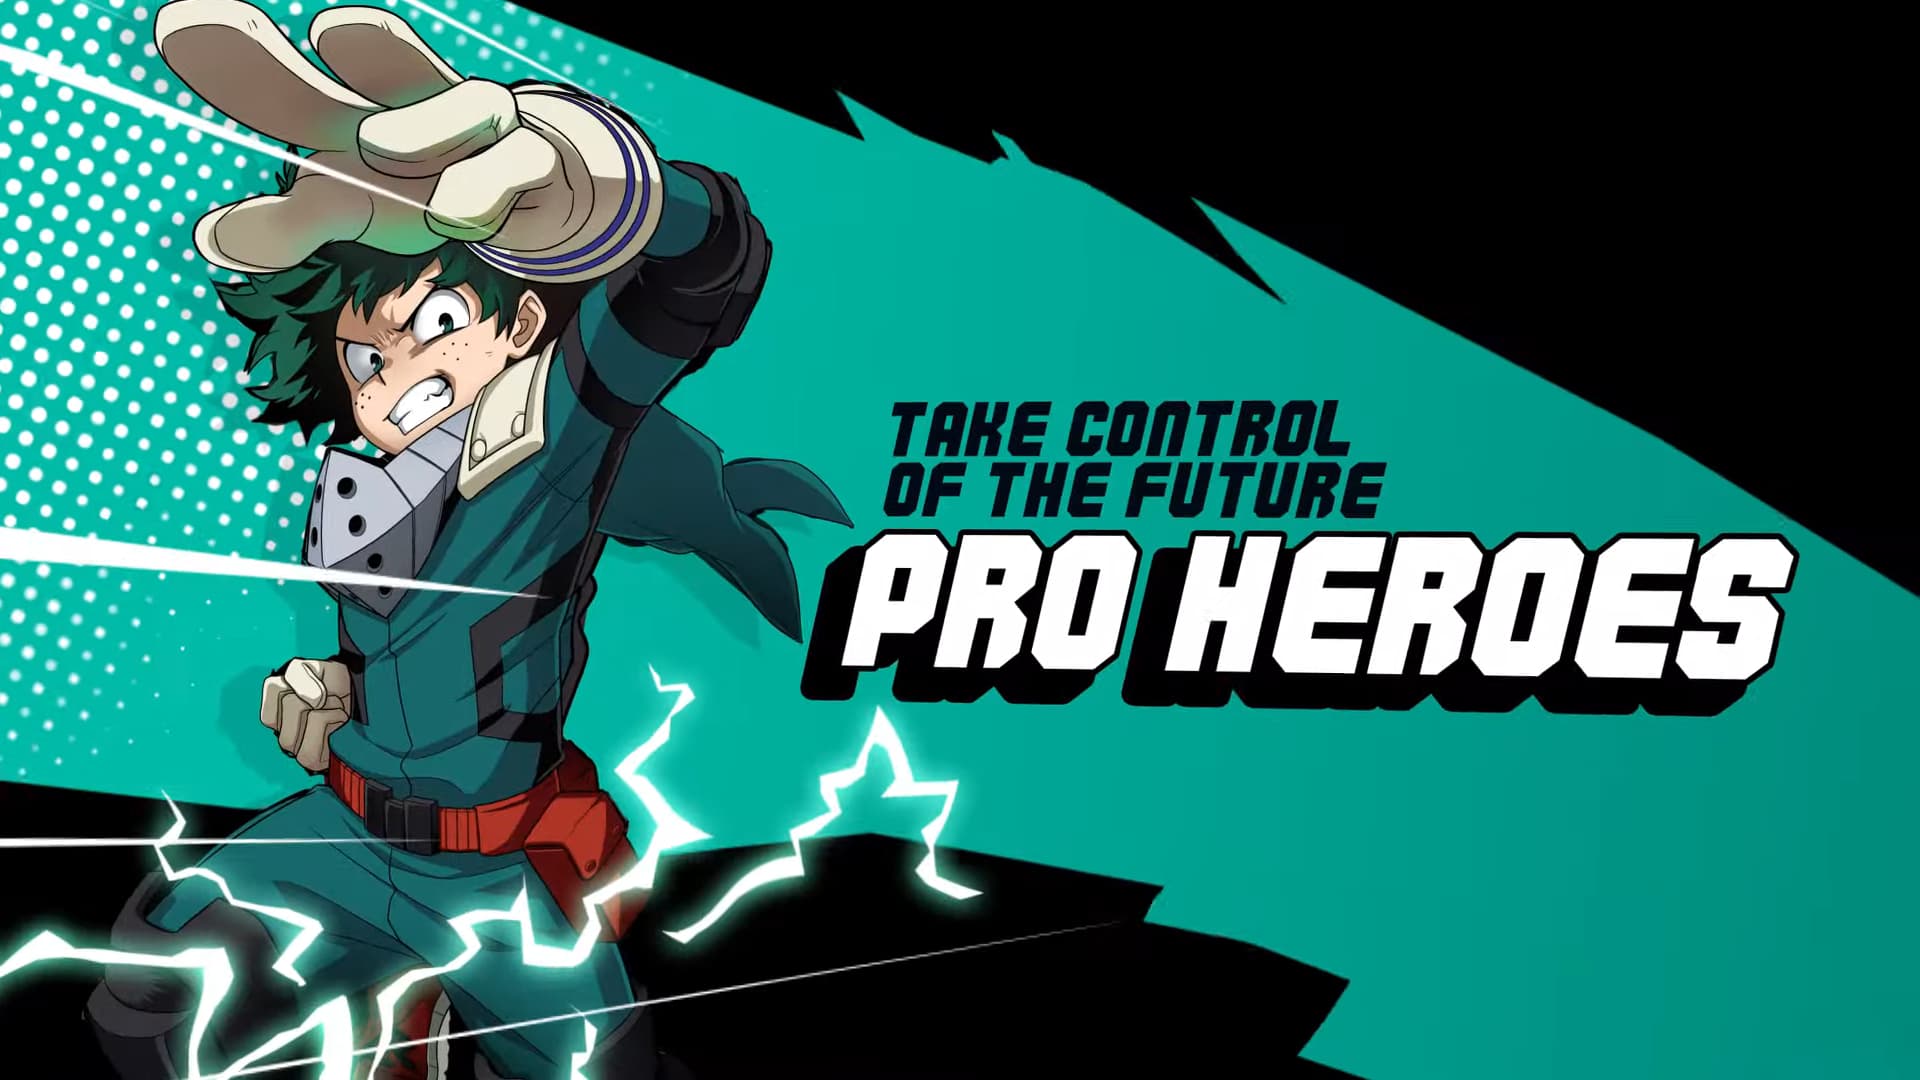 My Hero Academia: The Strongest Hero - First impression of new mobile game  launched in Taiwan - MMO Culture